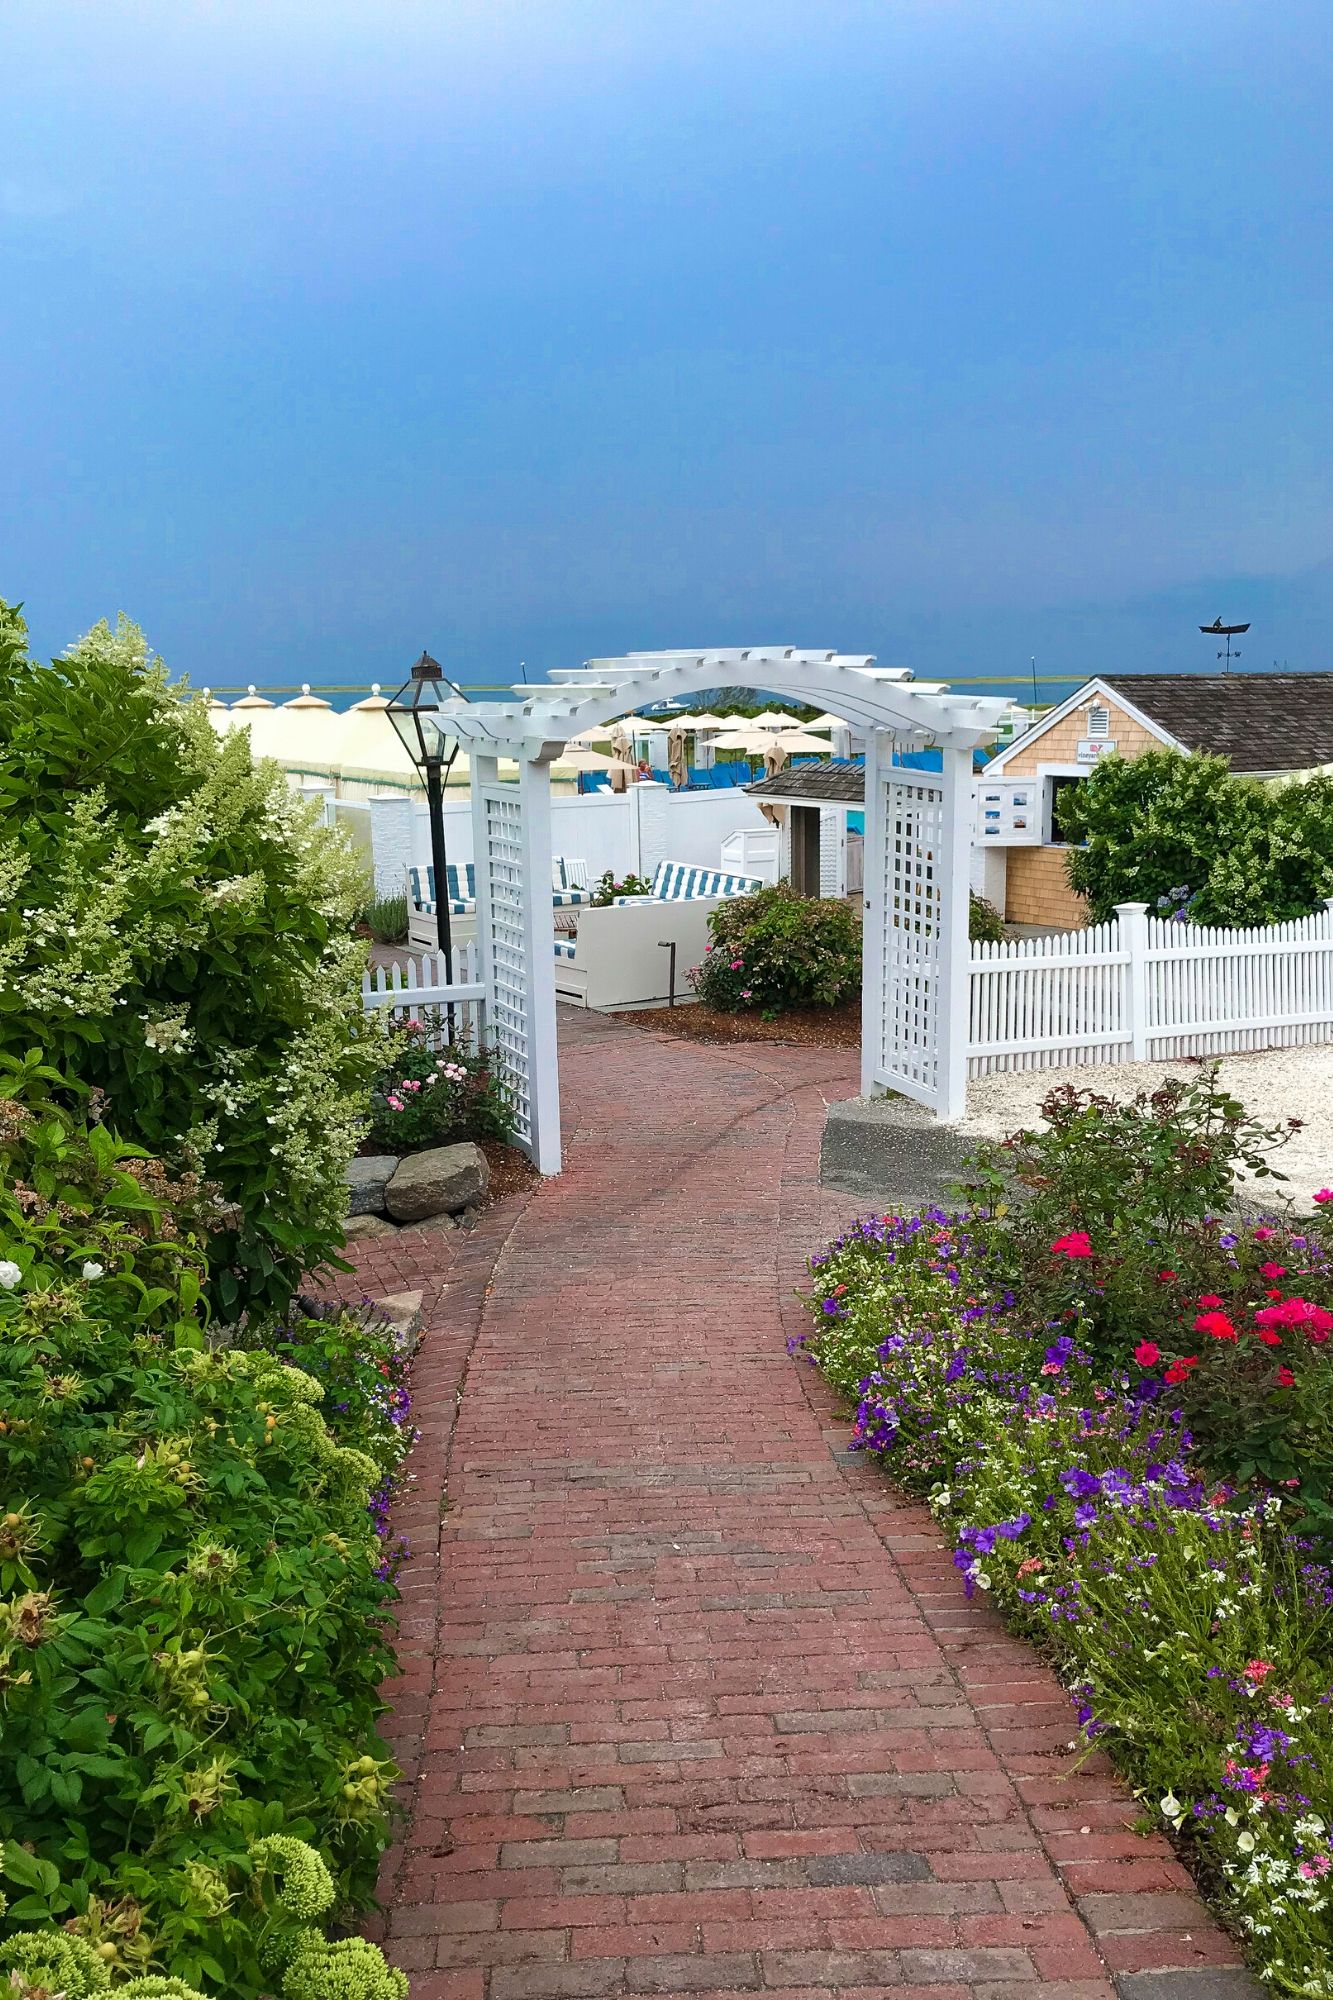 Enjoy a perfect day trip to Chatham in Cape Cod